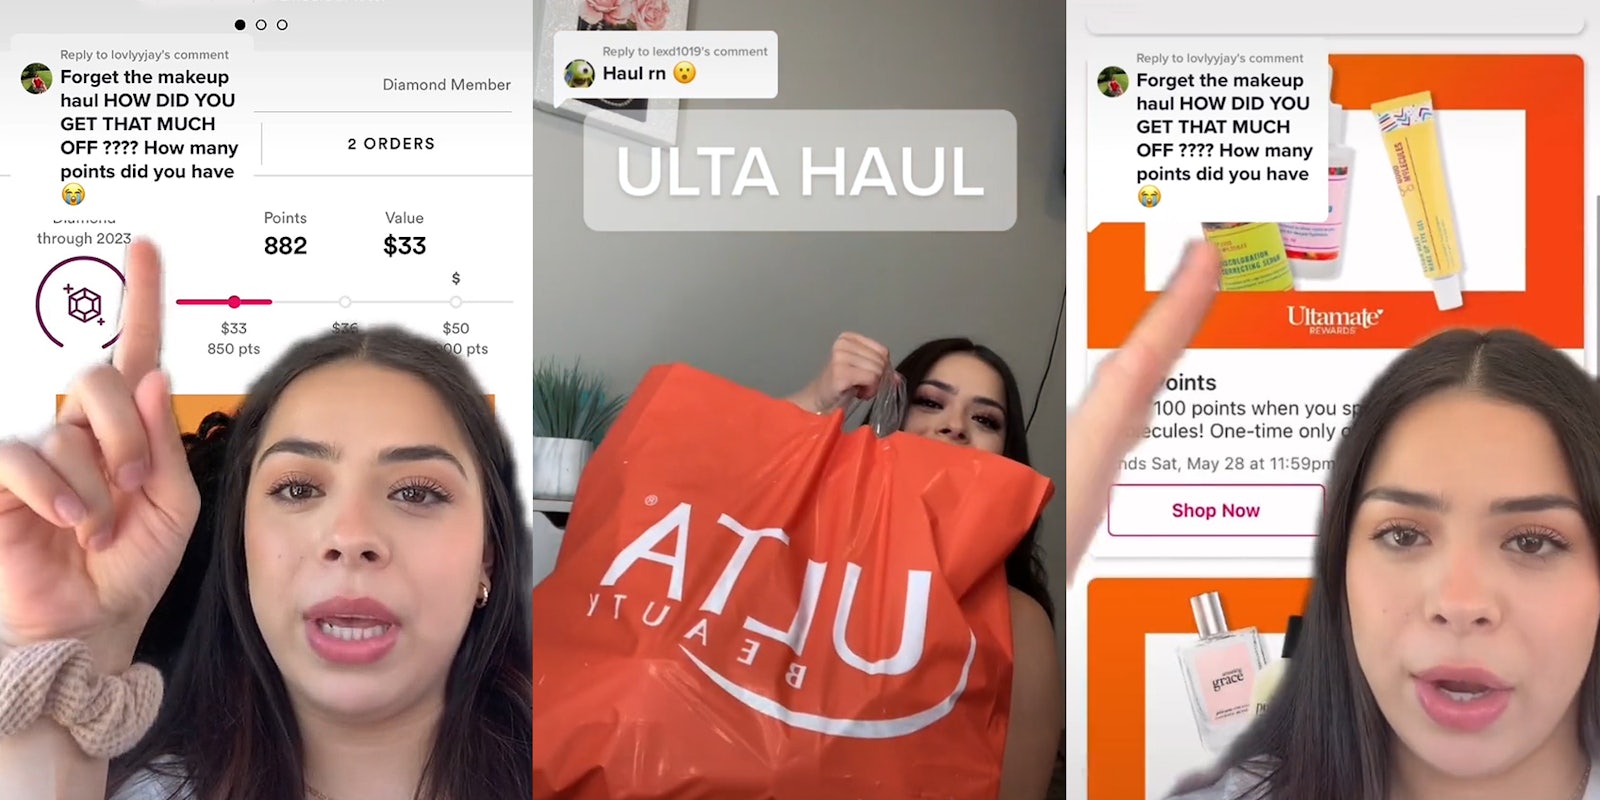 Wpman greenscreen TikTok over Ulta app pointing to rewards caption 'Forget the makeup haul HOW DID YOU GET THAT MUH OFF???? How many points did you have' (l) Woman holding Ulta bag caption 'Haul rn' 'ULTA HAUL' (c) woman greenscreen TikTok over Ulta app pointing to points deals caption 'Forget the makeup haul HOW DID YOU GET THAT MUCH OFF???? How many points did you have' (r)